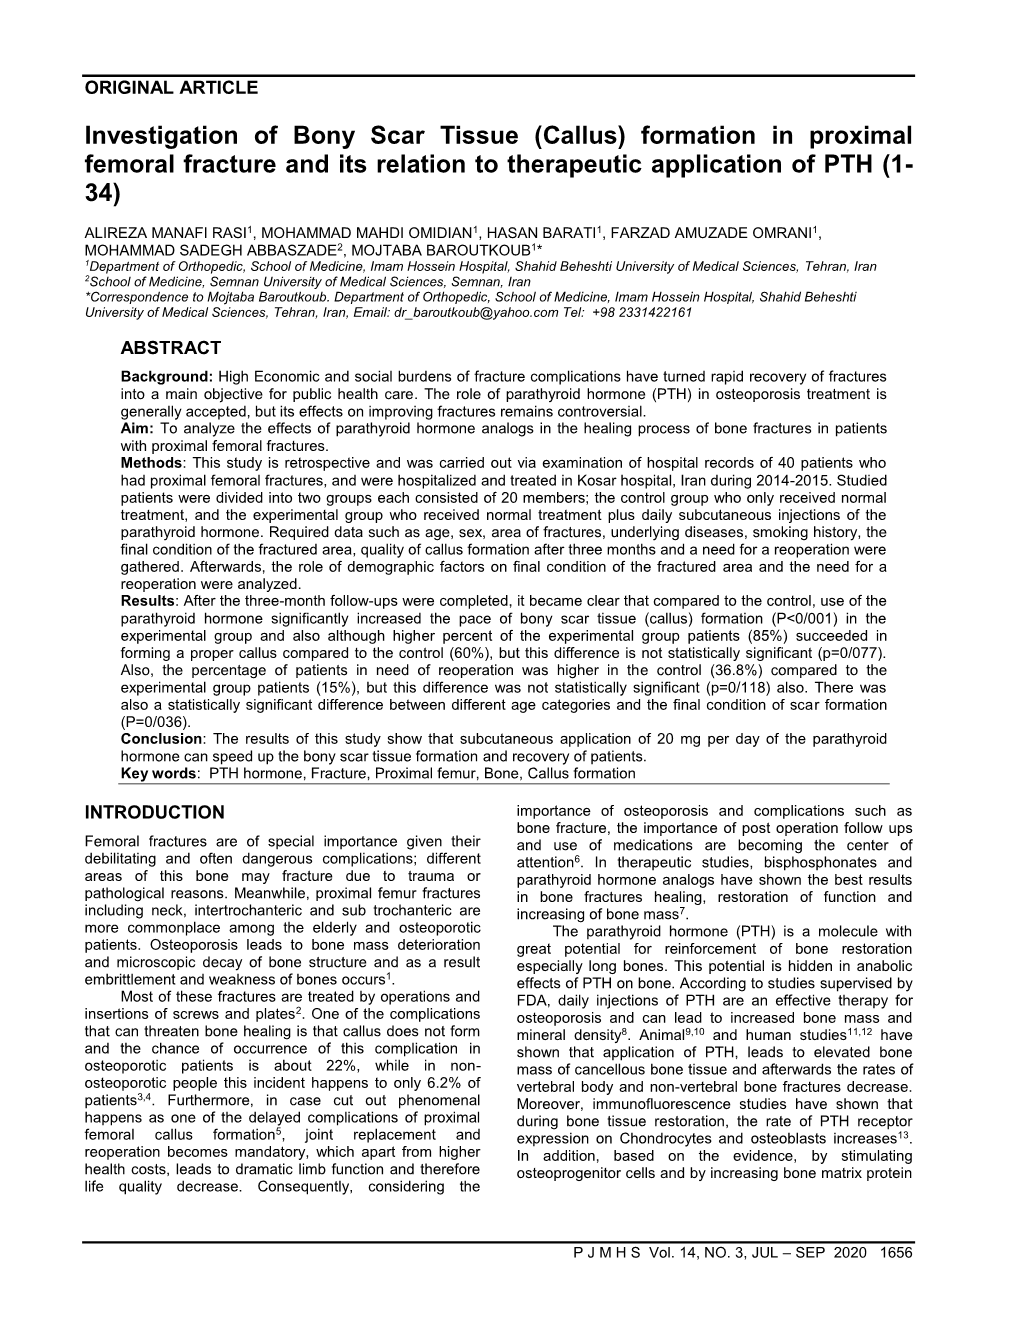 Investigation of Bony Scar Tissue (Callus) Formation in Proximal Femoral Fracture and Its Relation to Therapeutic Application of PTH (1- 34)